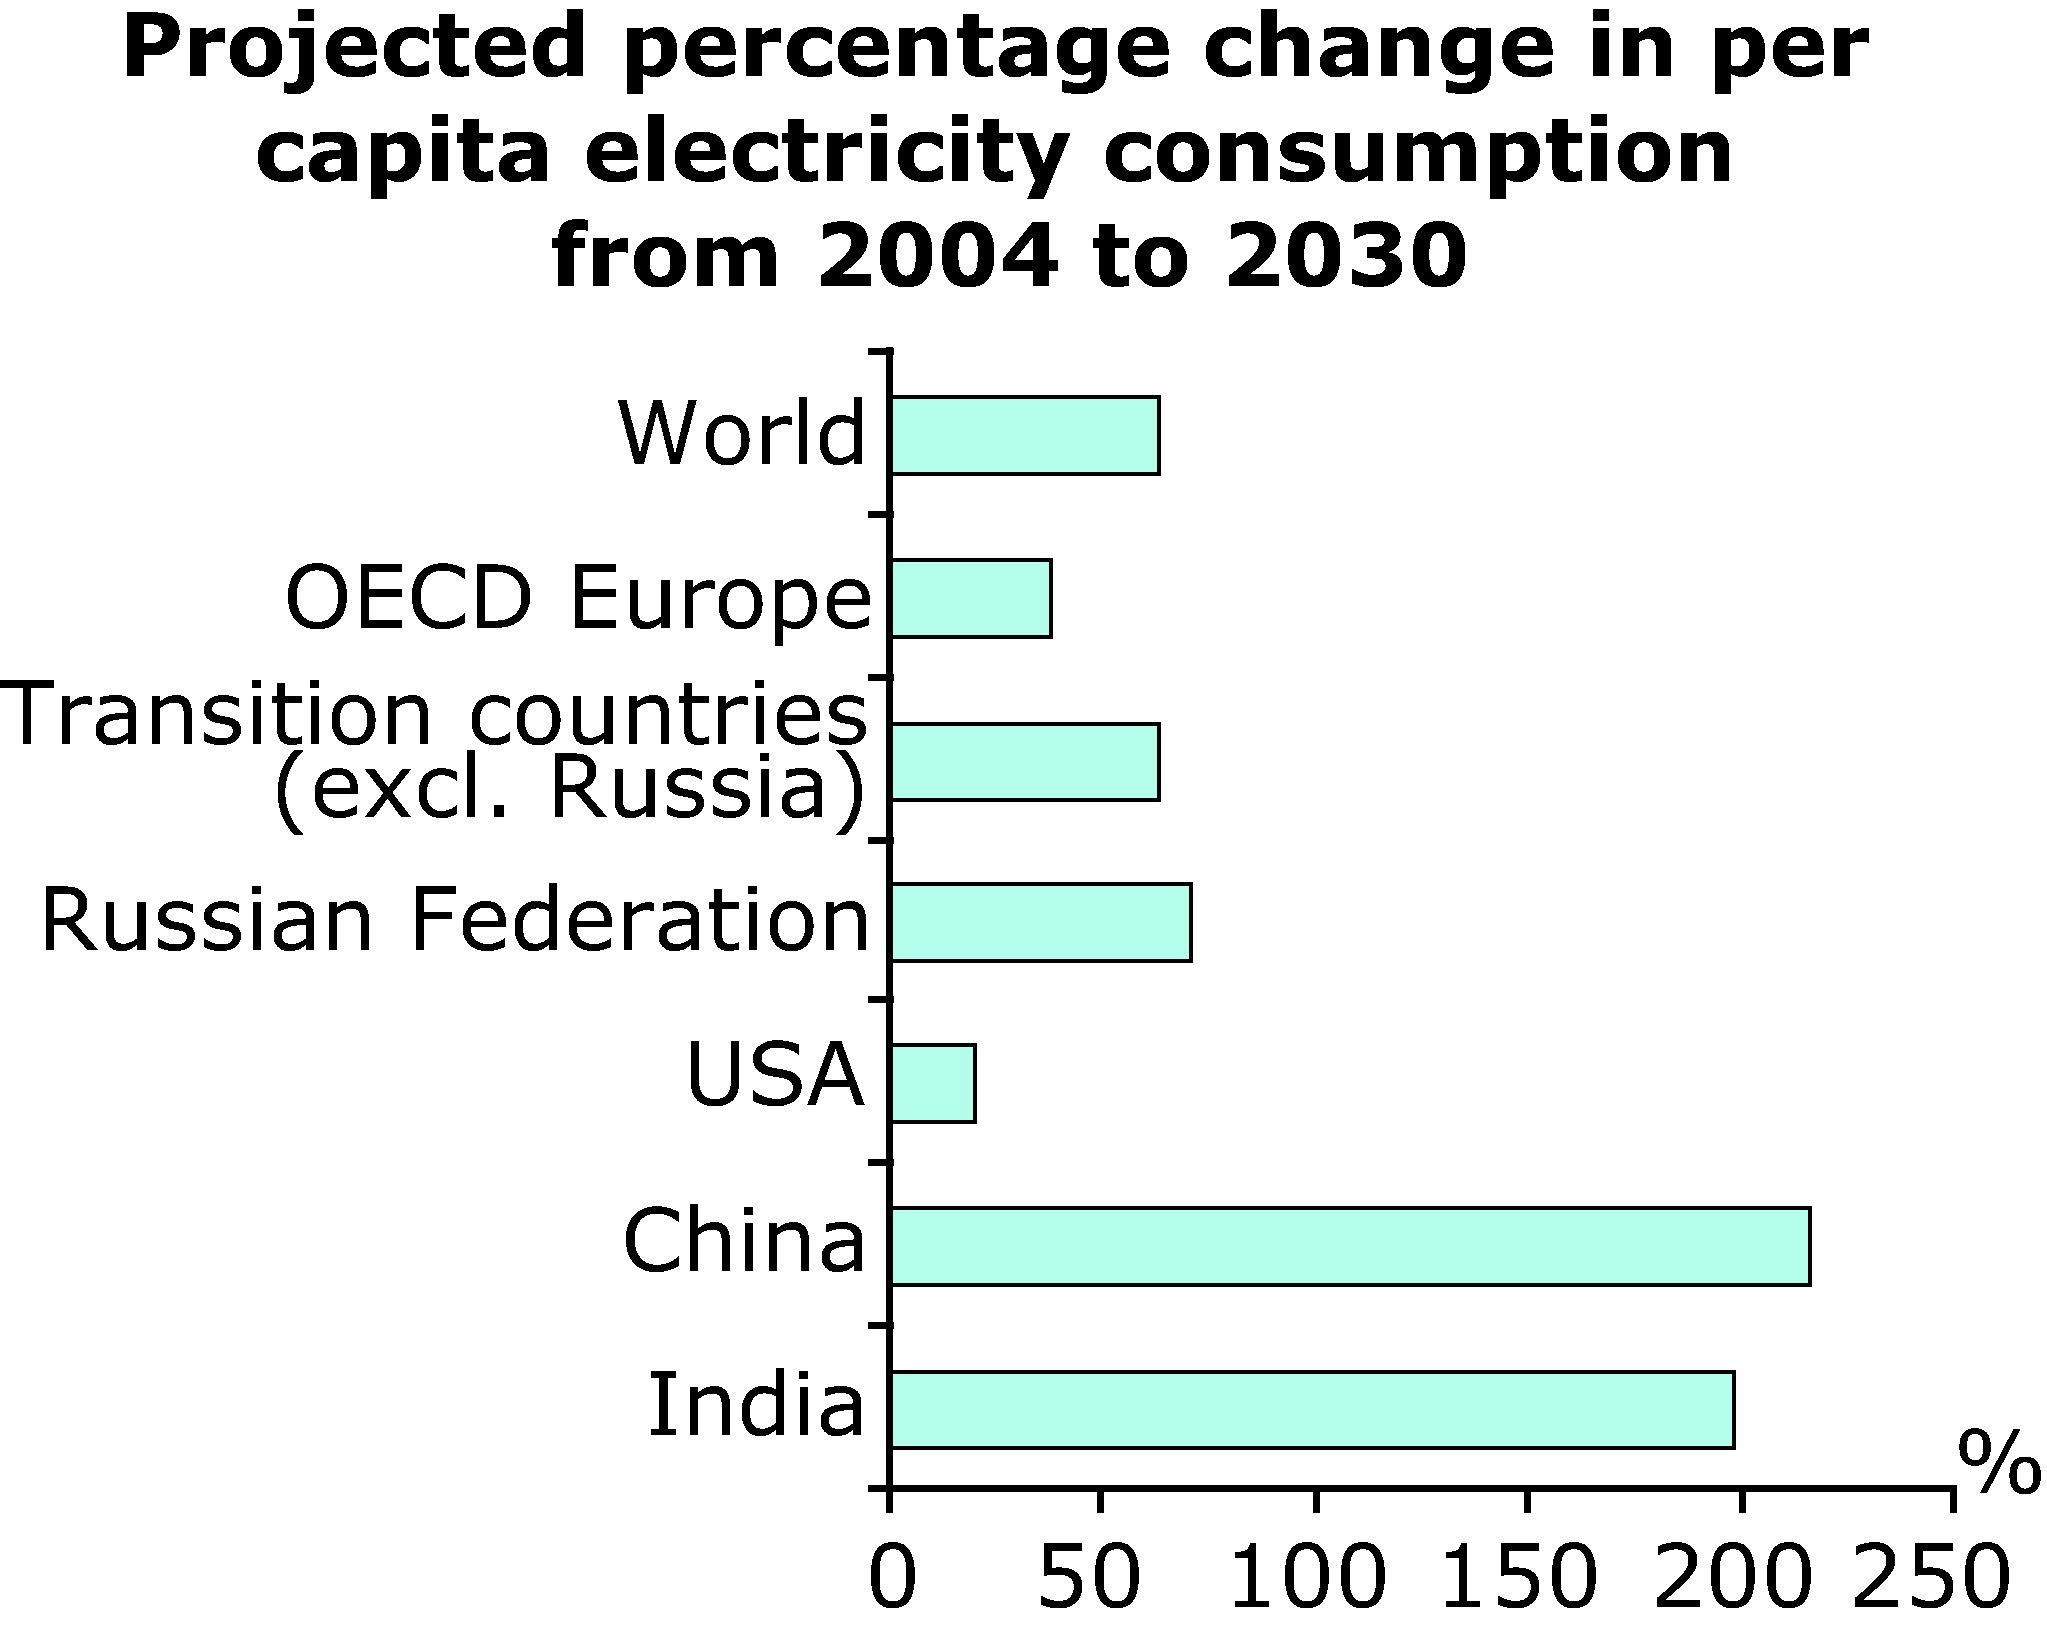 Projected percentage change in per capita electricity consumption from 2004 to 2030